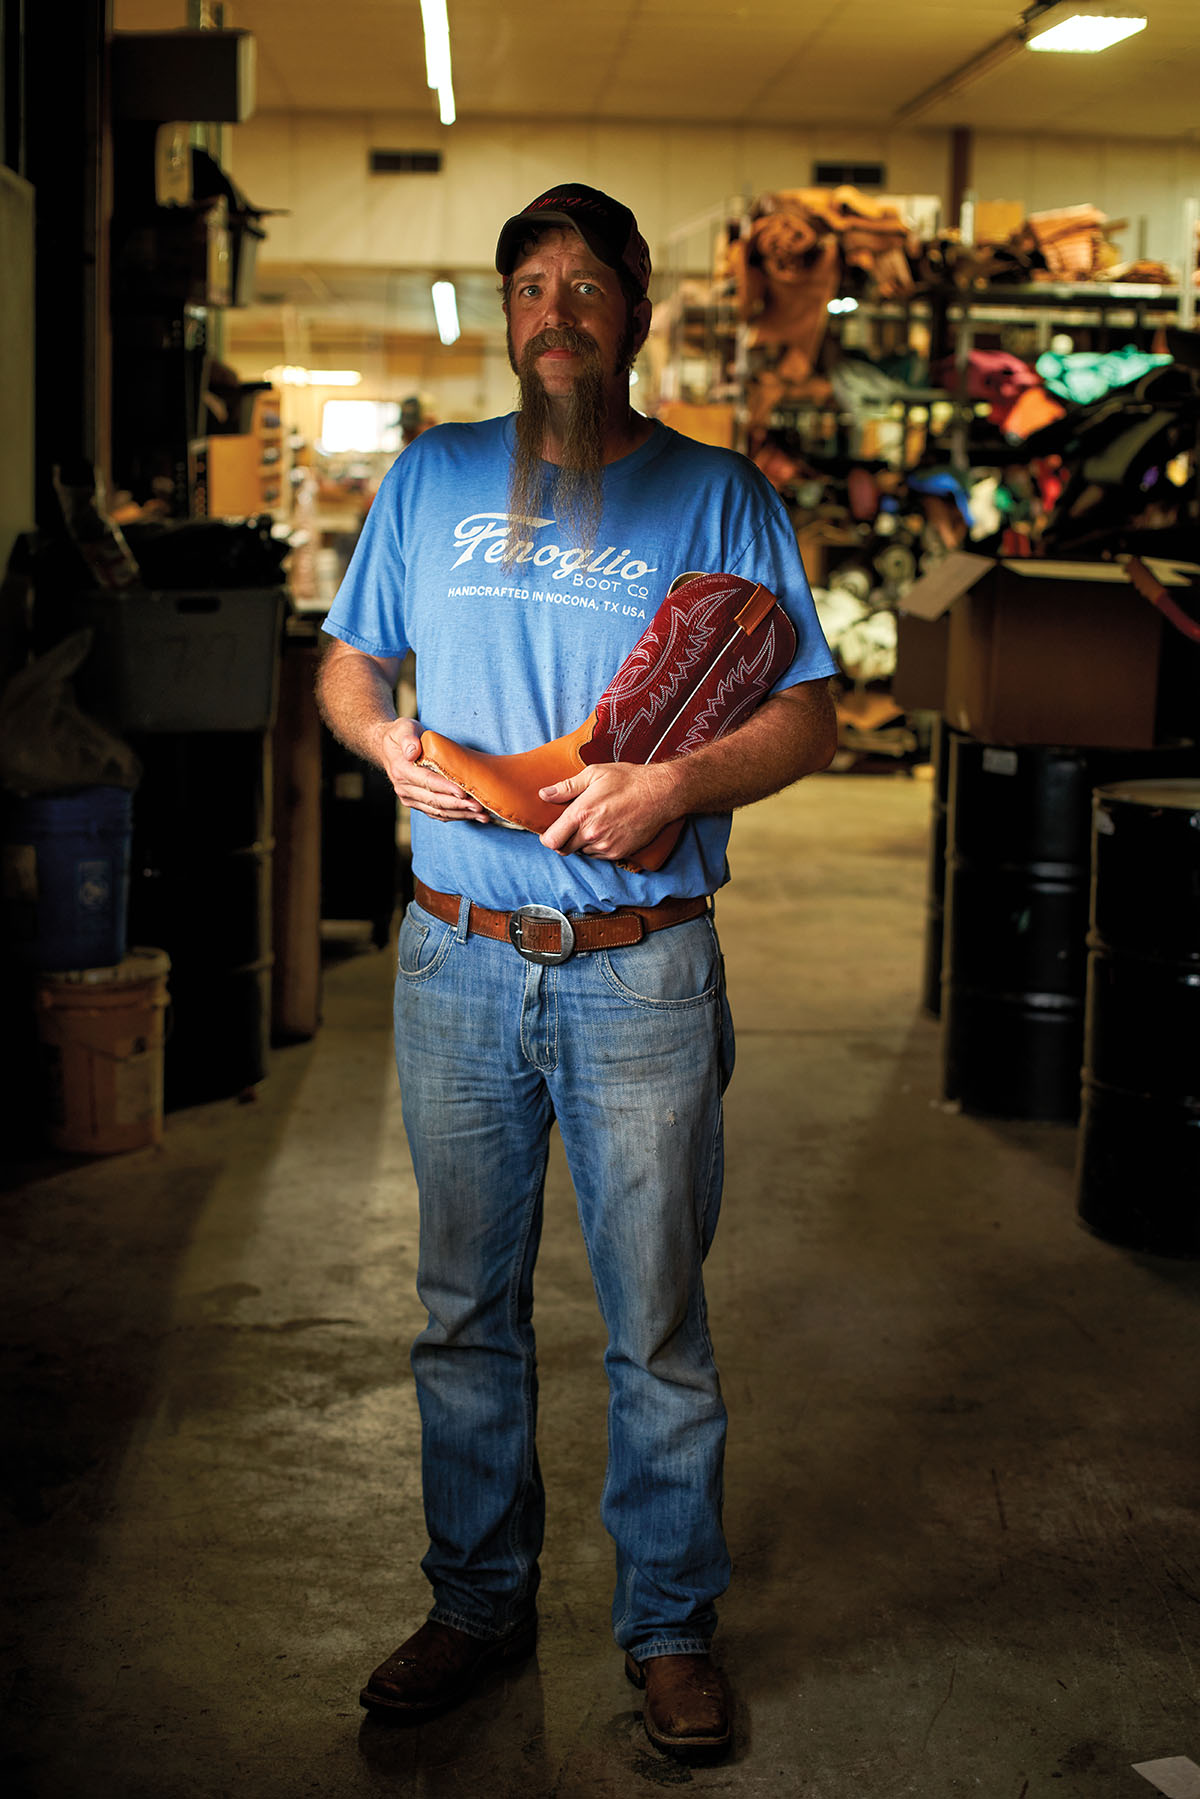 A man in a blue shirt and jeans holds a cowboy boot in a store